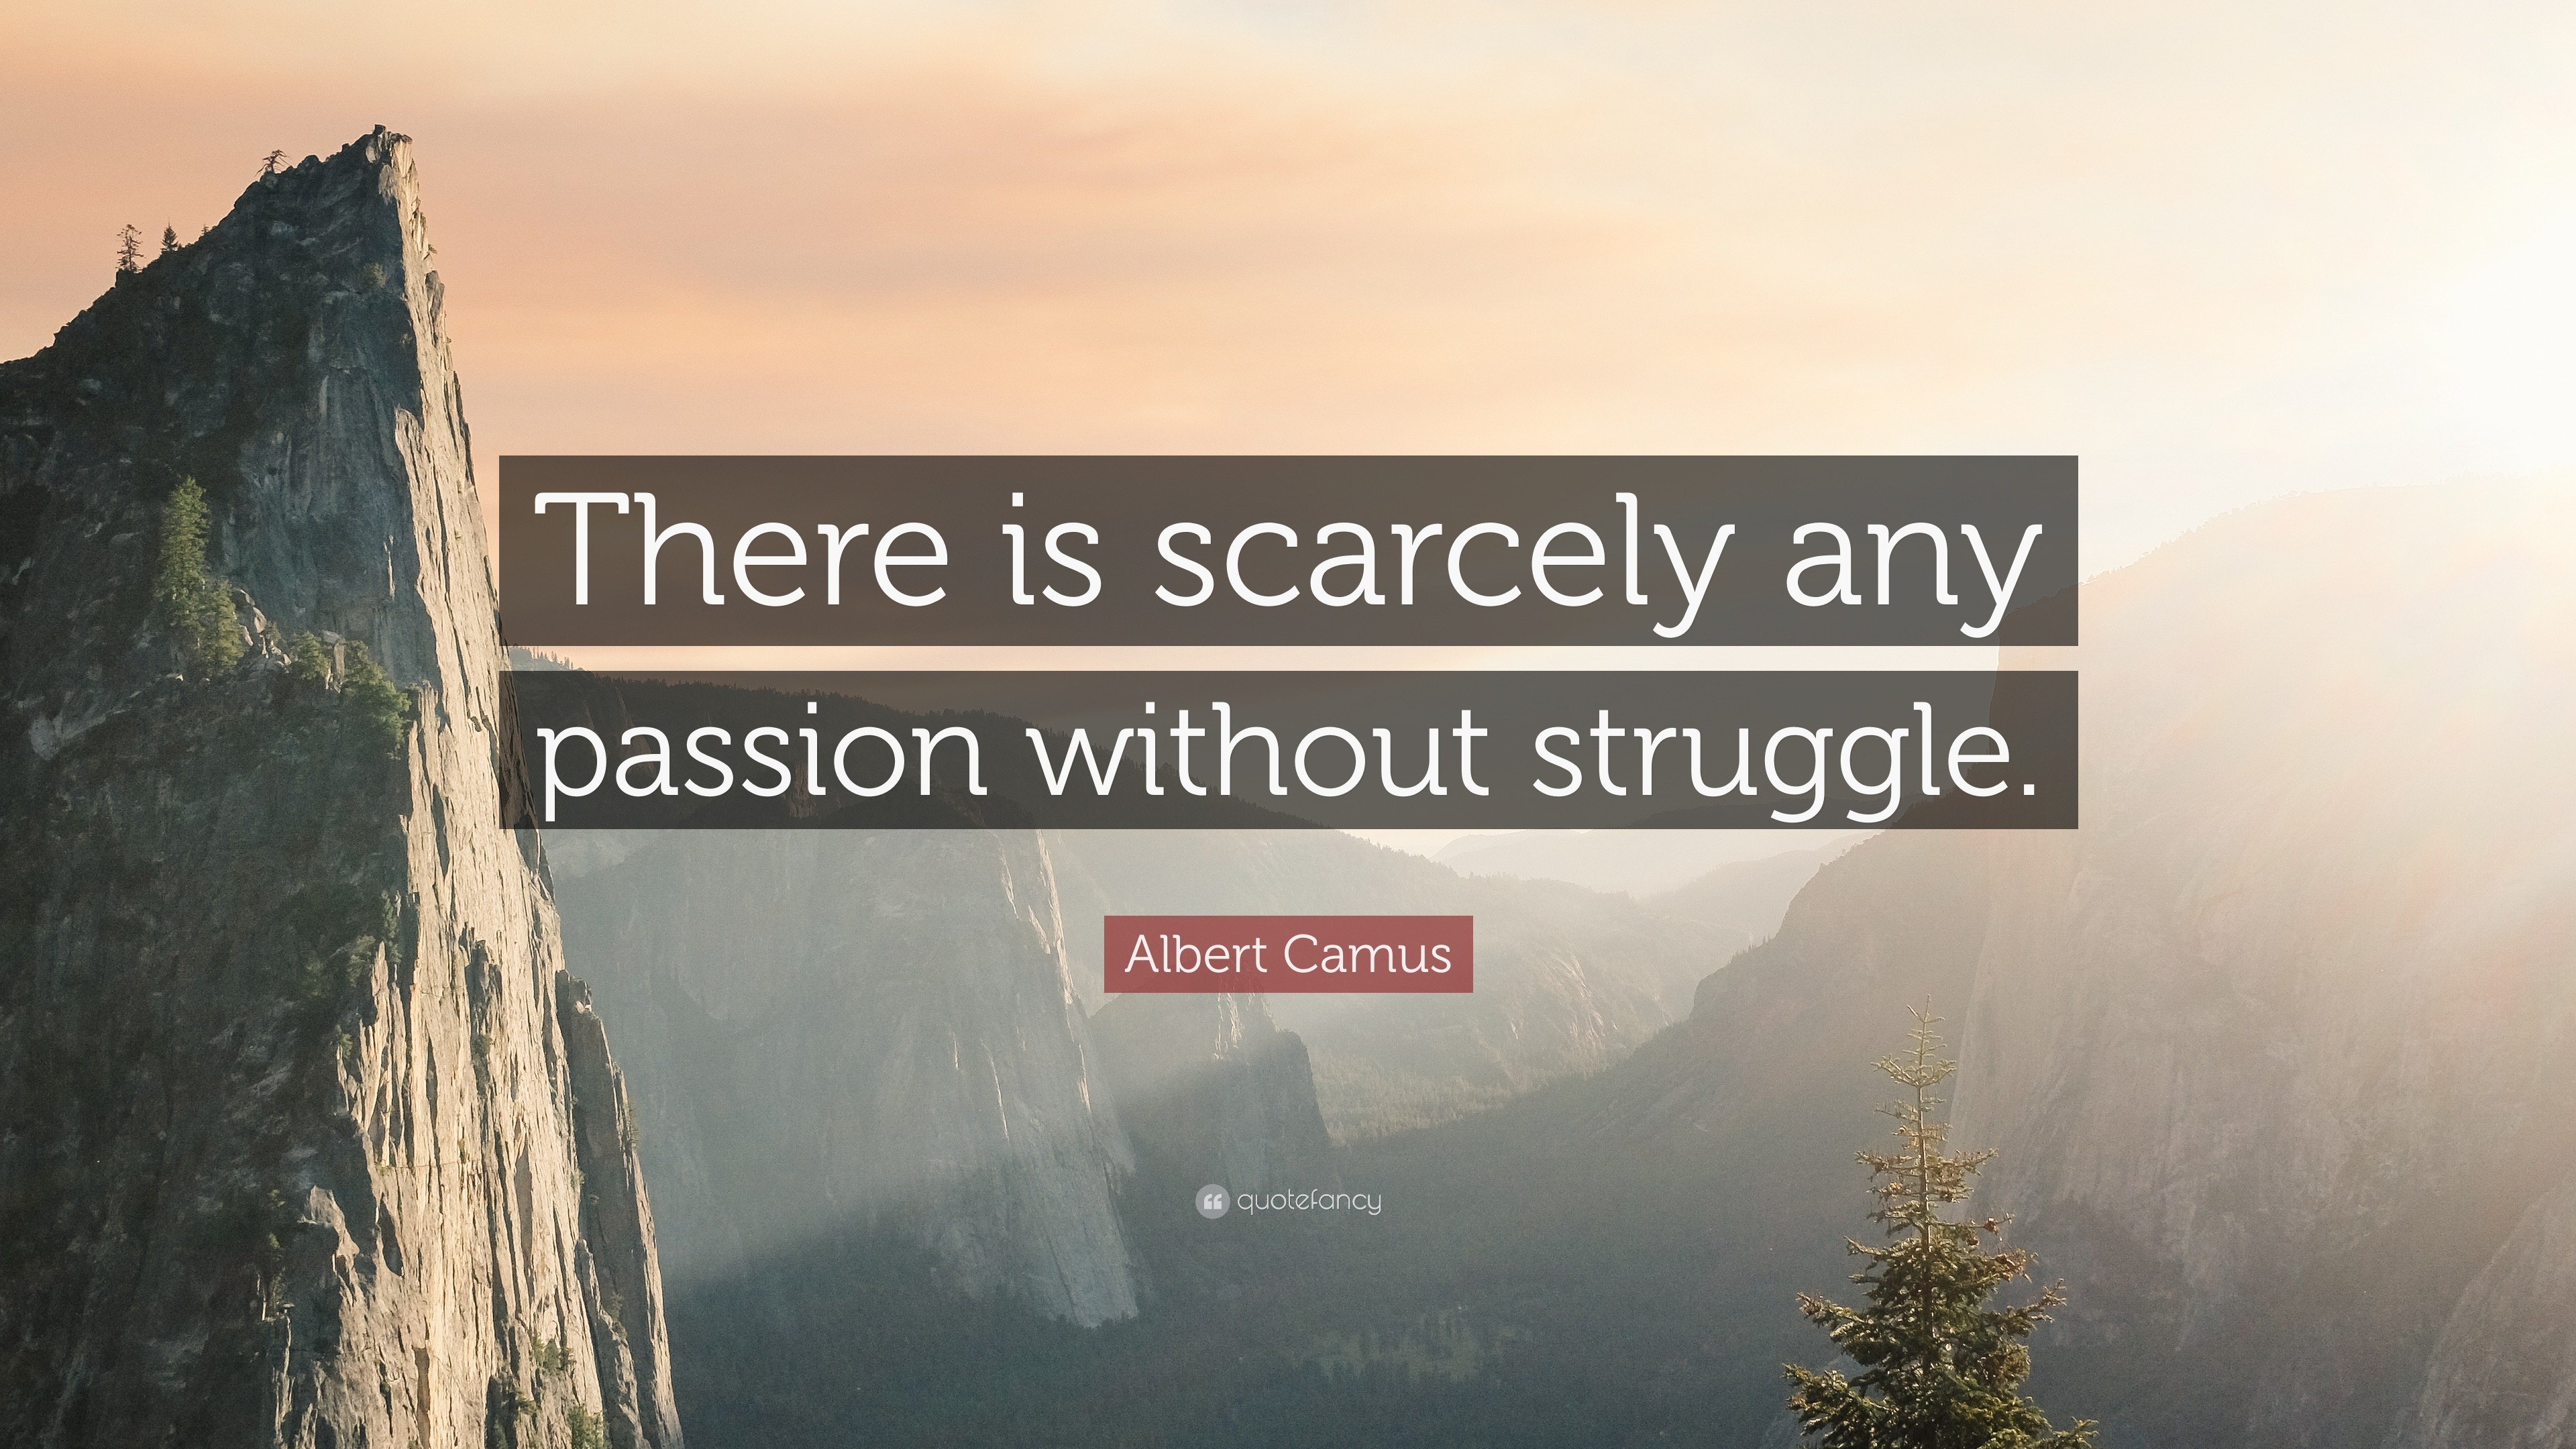 12470 Albert Camus Quote There is scarcely any passion without struggle